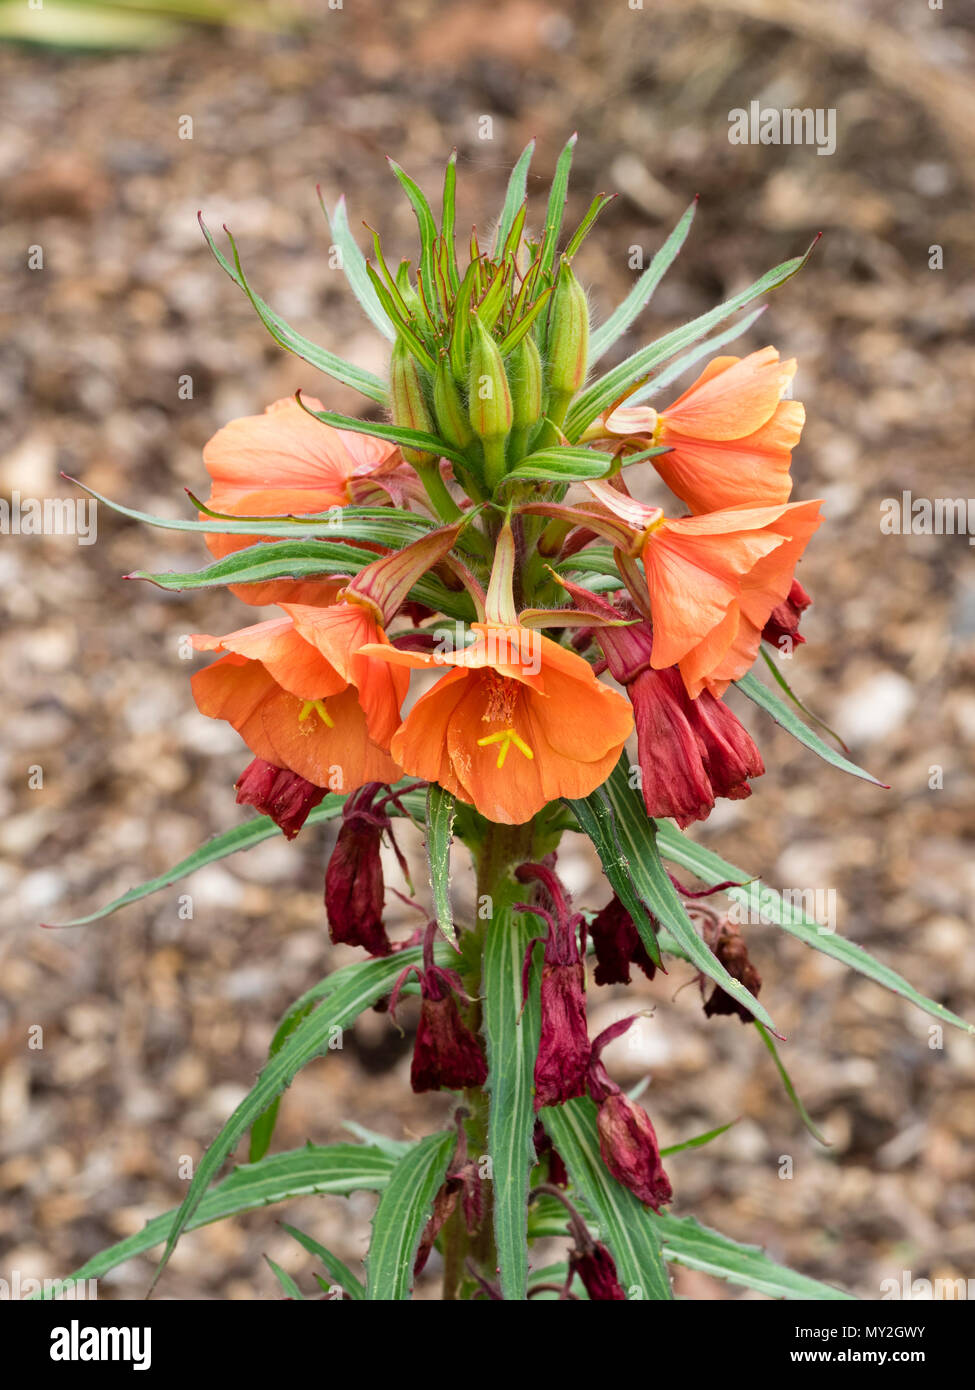 Red-orange flowers in the spike of the perennial evening primrose, Oenothera versicolor 'Sunset Boulevard' Stock Photo